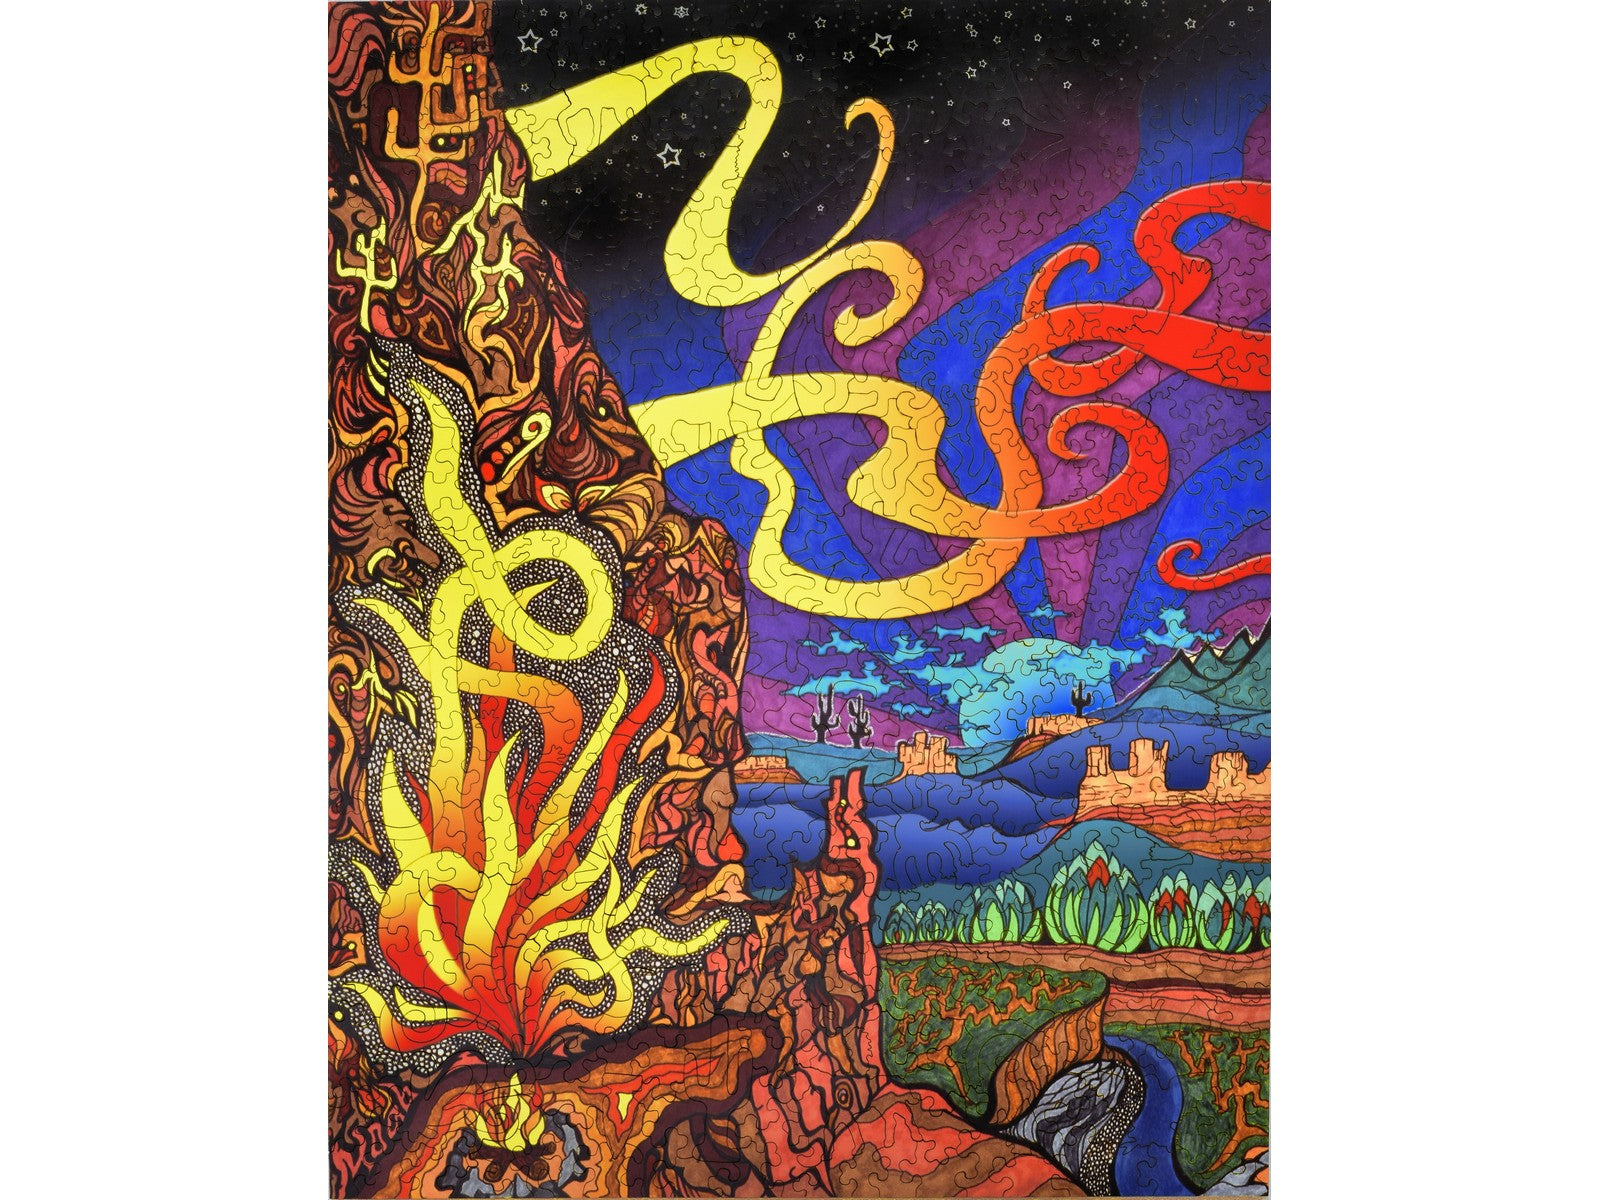 The front of the puzzle, Island in the Sky, which shows a colorful desert scene with a campfire and abstract patterns.